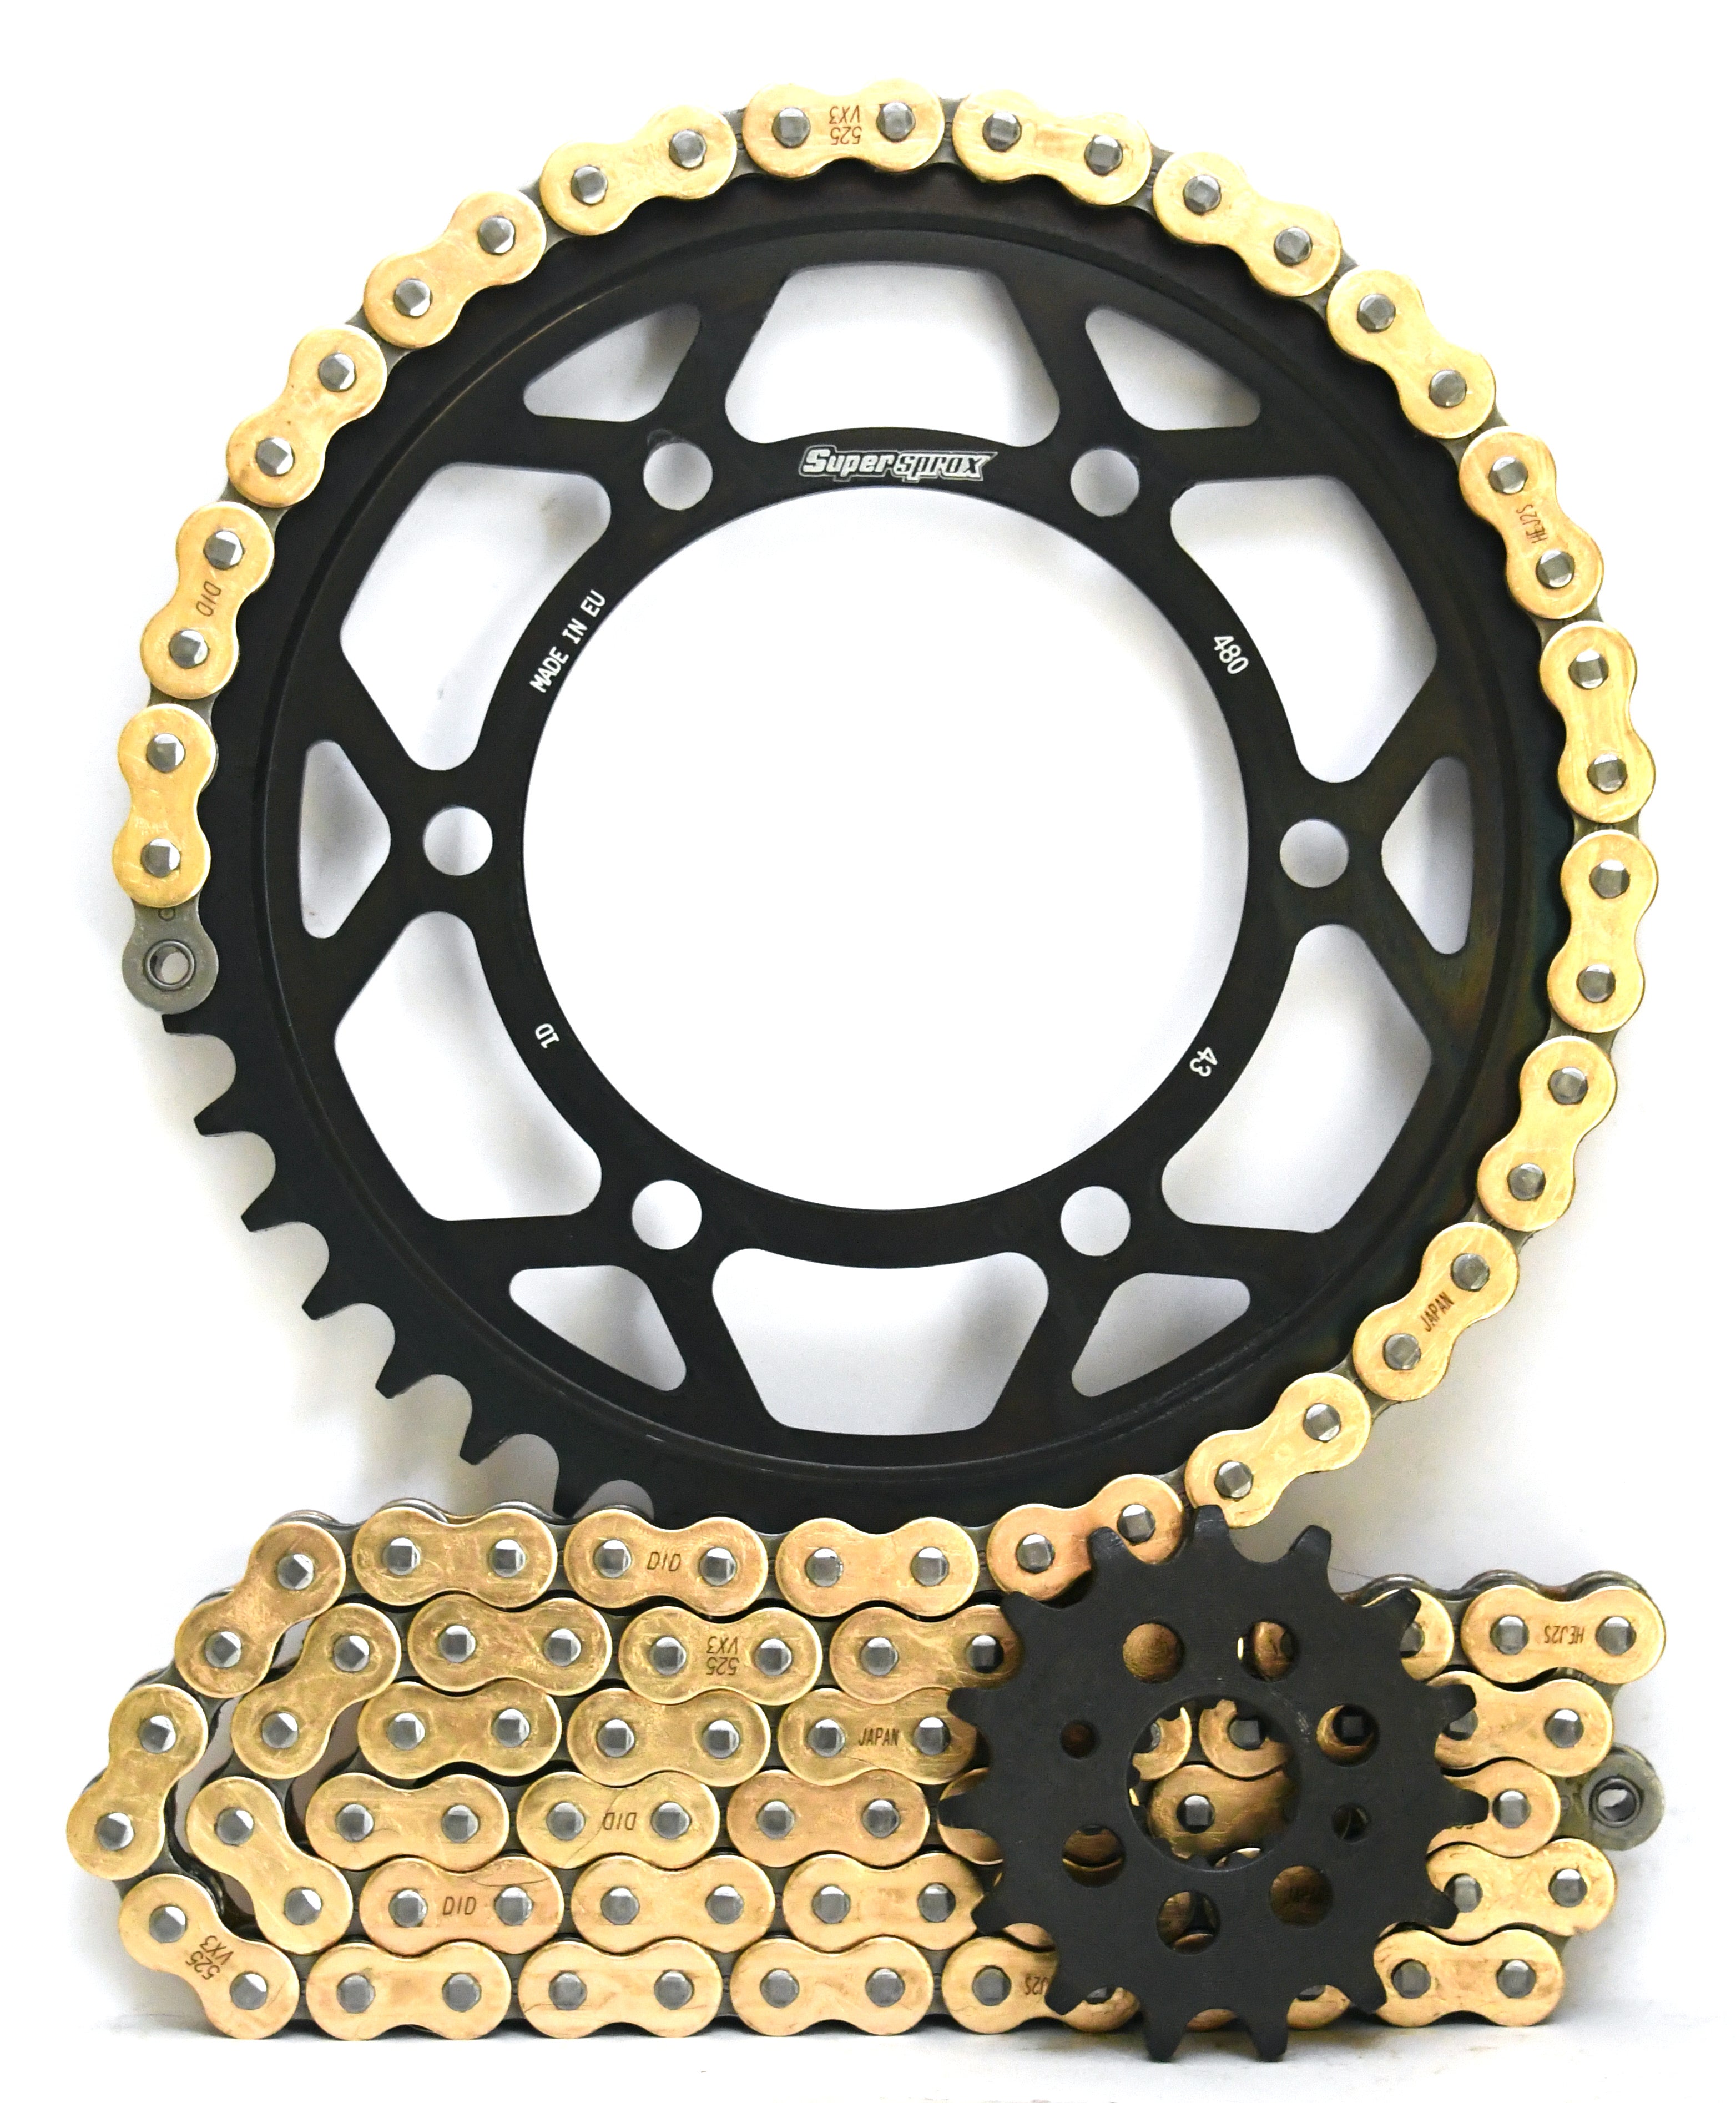 Supersprox Chain & Steel Sprocket Kit for KTM 950/990 Supermoto (Inc R/T) 05-13 - Standard Gearing